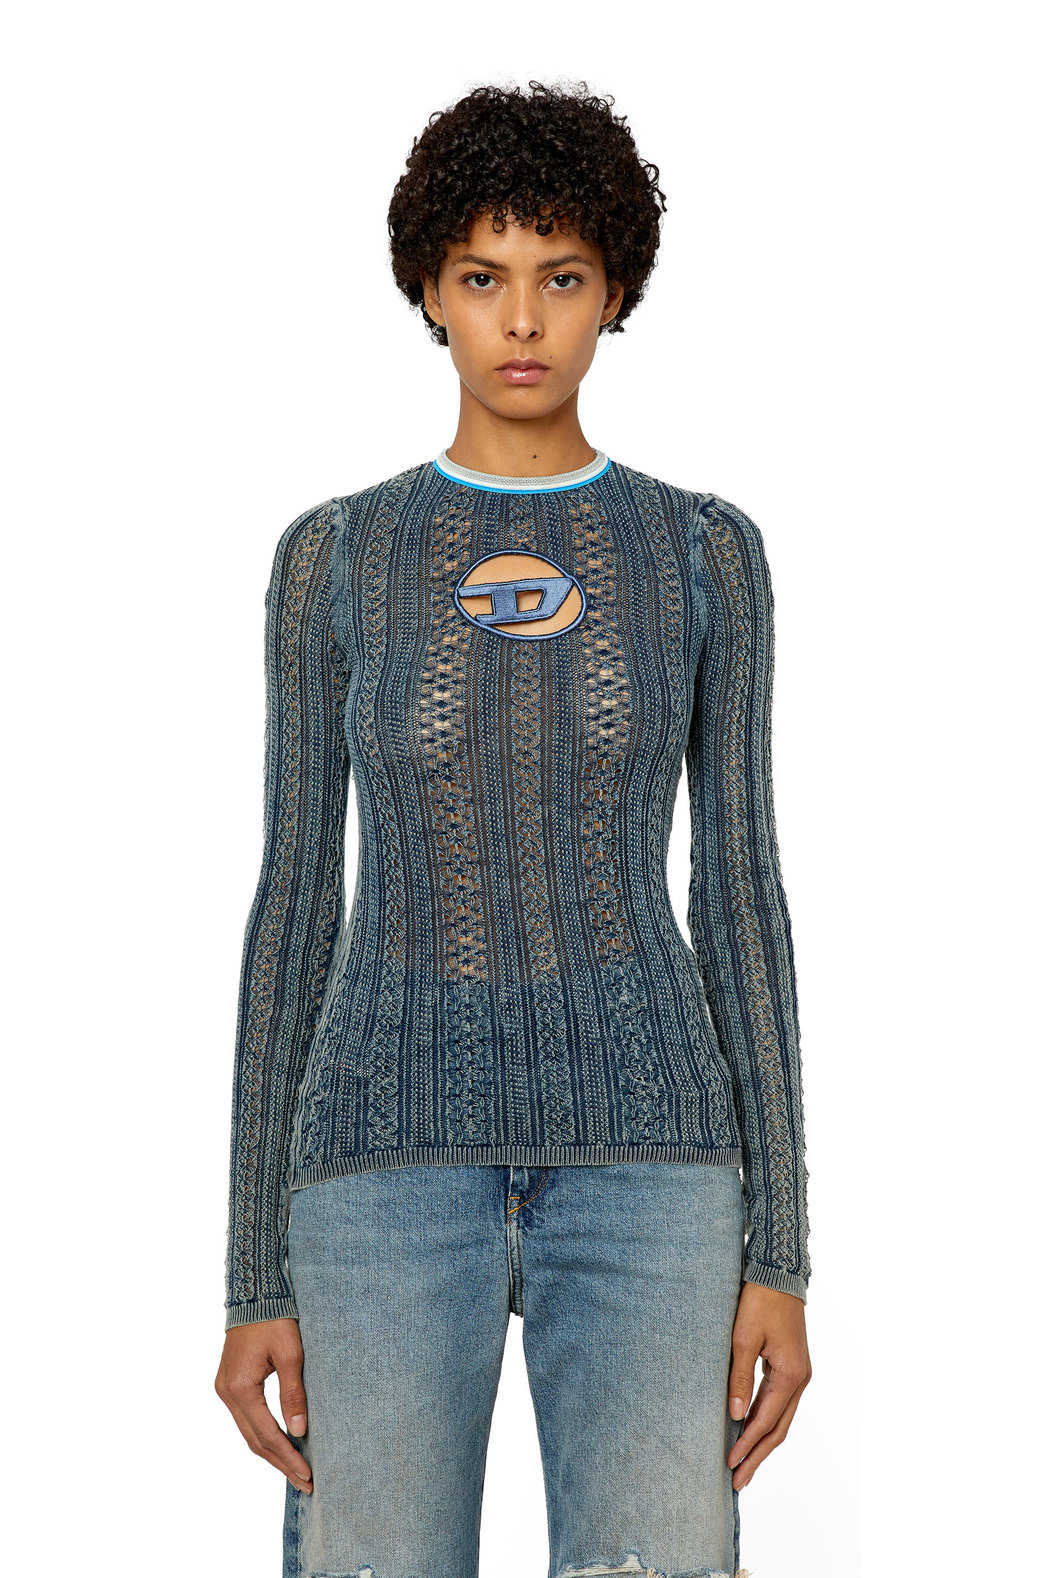 Pointelle jumper with oval D cutout